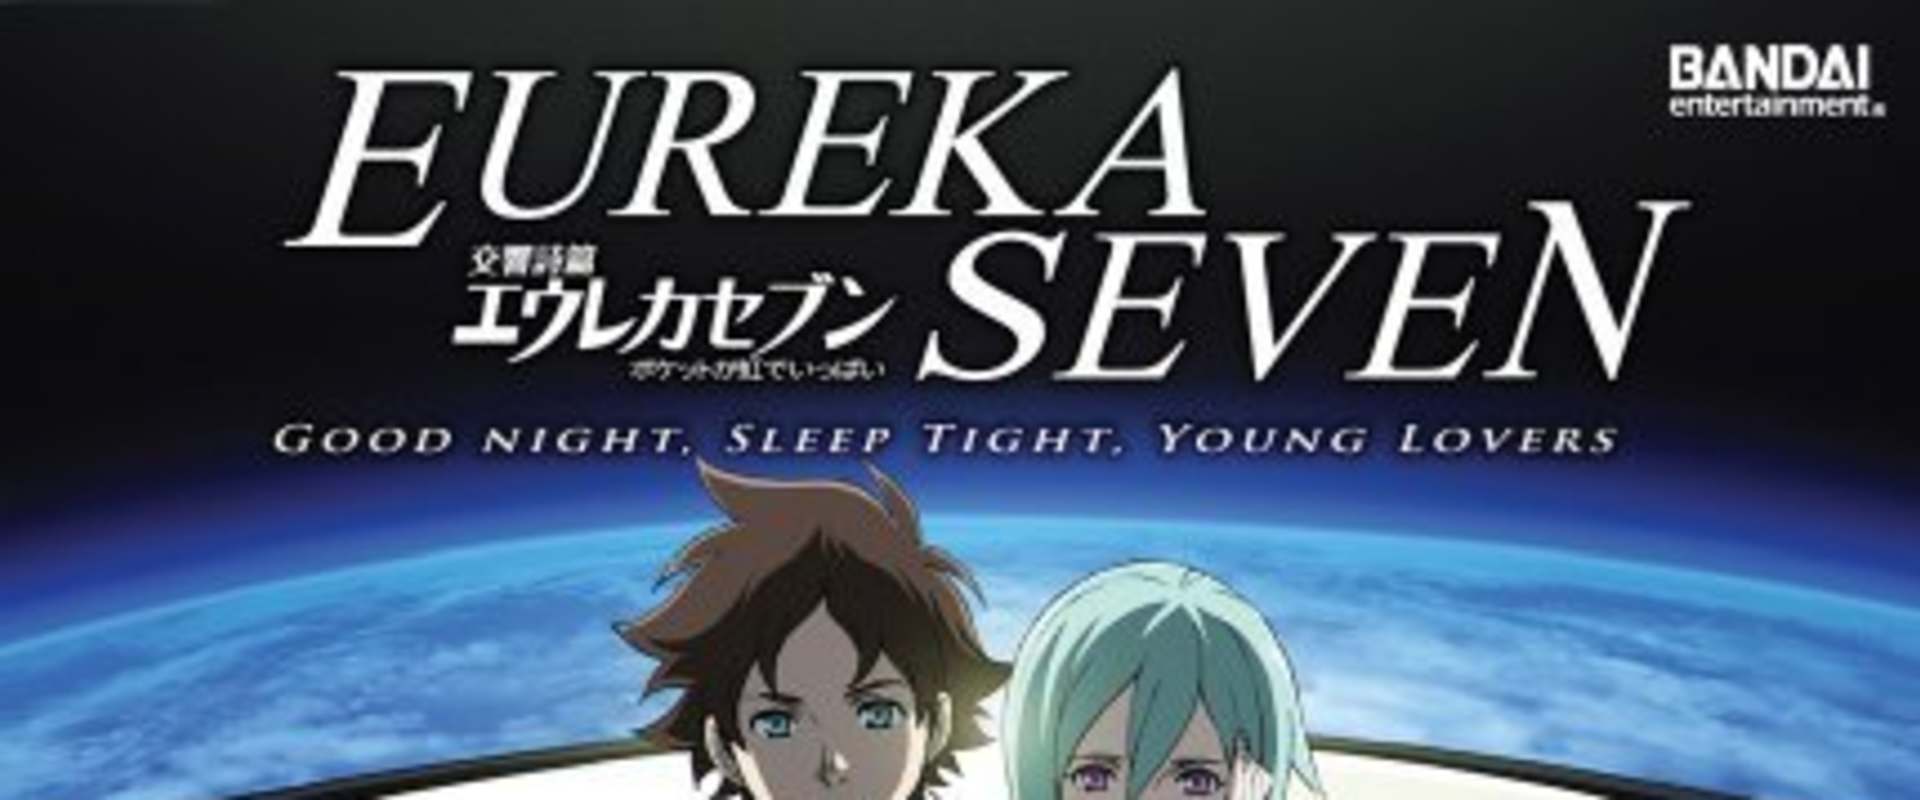 Psalms of Planets Eureka Seven: Good Night, Sleep Tight, Young Lovers background 1